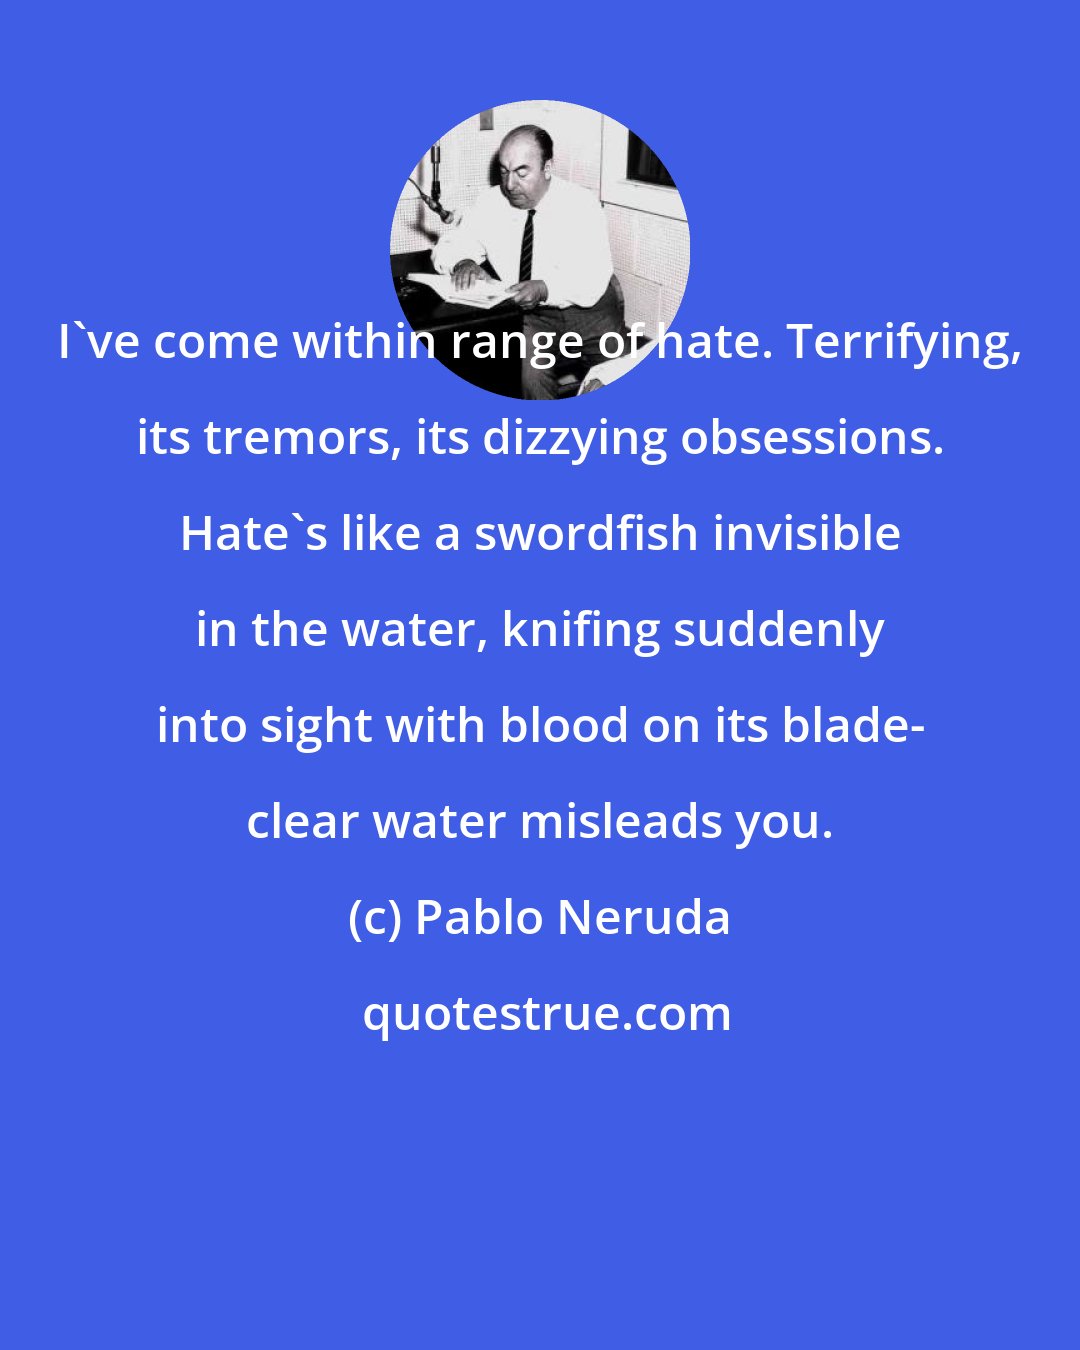 Pablo Neruda: I've come within range of hate. Terrifying, its tremors, its dizzying obsessions. Hate's like a swordfish invisible in the water, knifing suddenly into sight with blood on its blade- clear water misleads you.